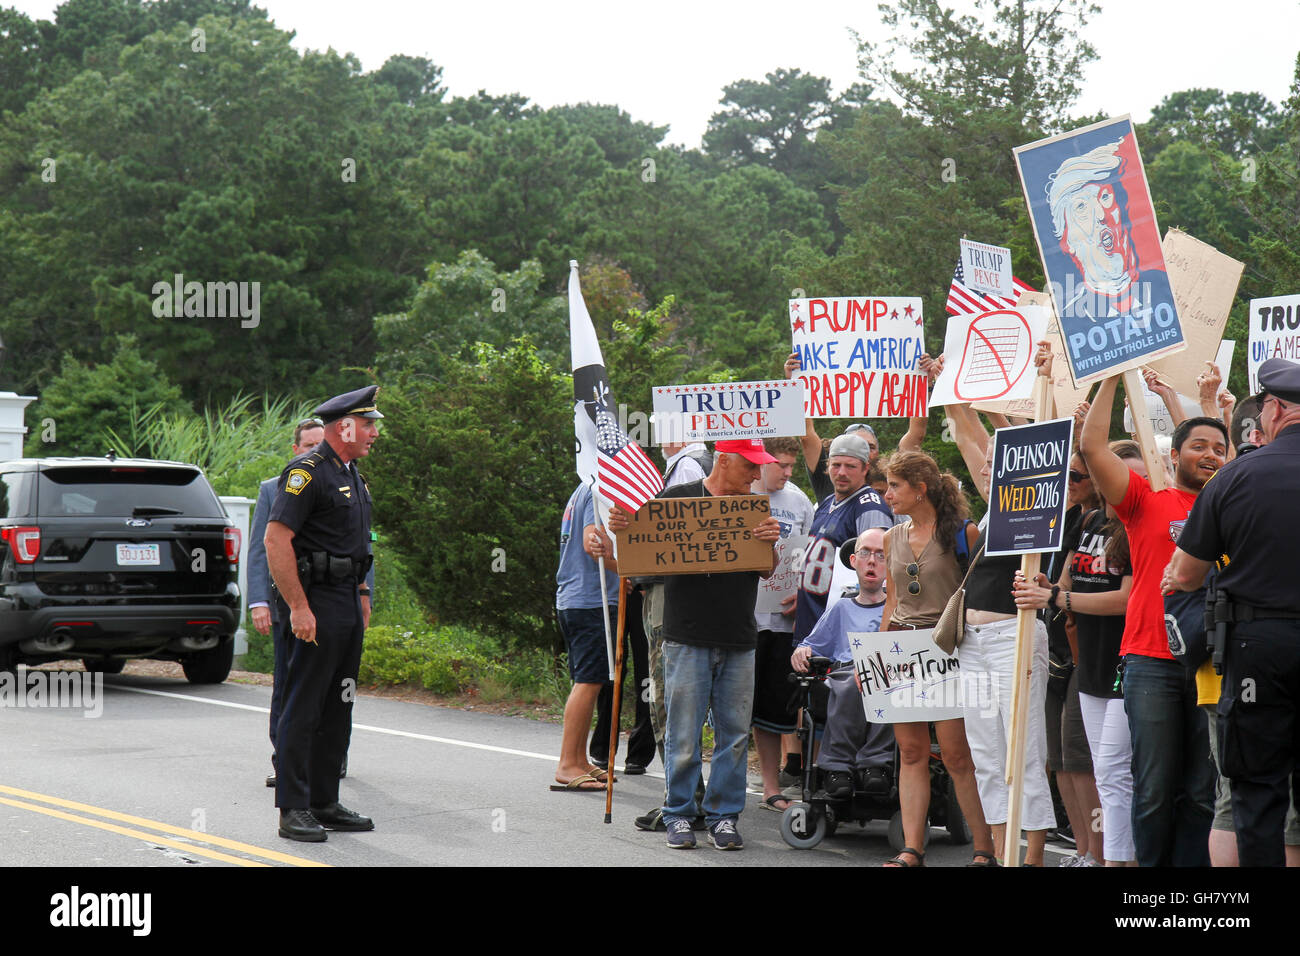 Osterville, Massachusetts, USA. 6th August, 2016. Protesters hold signs opposing Republican presidential nominee Donald Trump, near a fundraiser businessman William Koch is hosting for Trump. A pro-Trump counter-protester standing to the left also holds signs. Credit:  Susan Pease/Alamy Live News Stock Photo